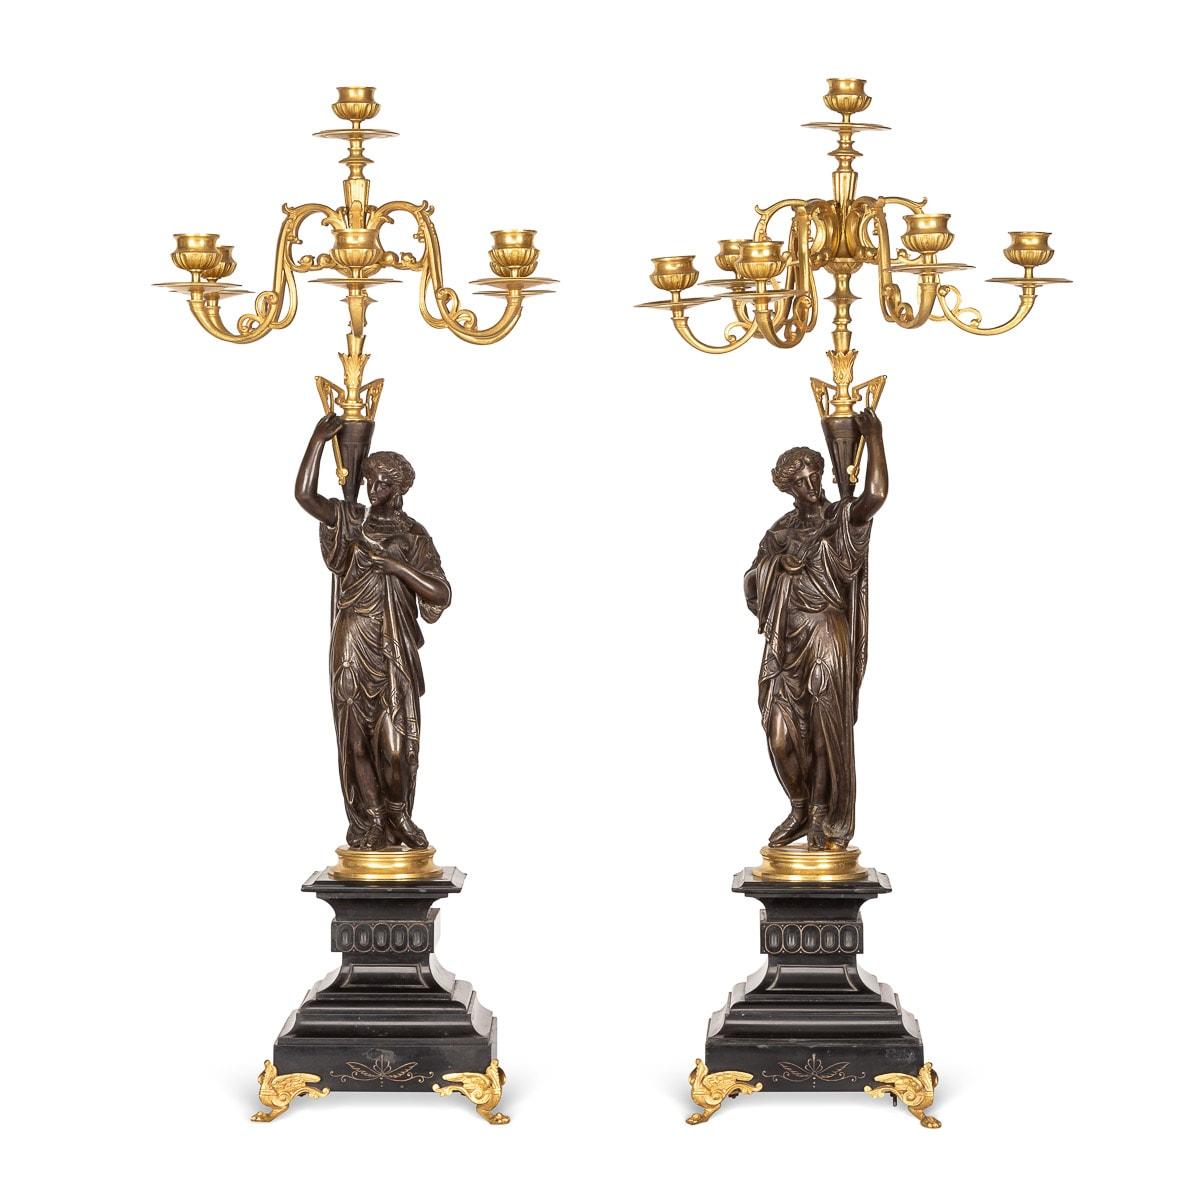 Antique 19th century French pair of bronze candelabra each formed as a standing female figure holding a gilt-bronze 7 light candelabrum. The cast bronze figures stood on black marble bases on wing and paw shaped supports.

CONDITION
In Great